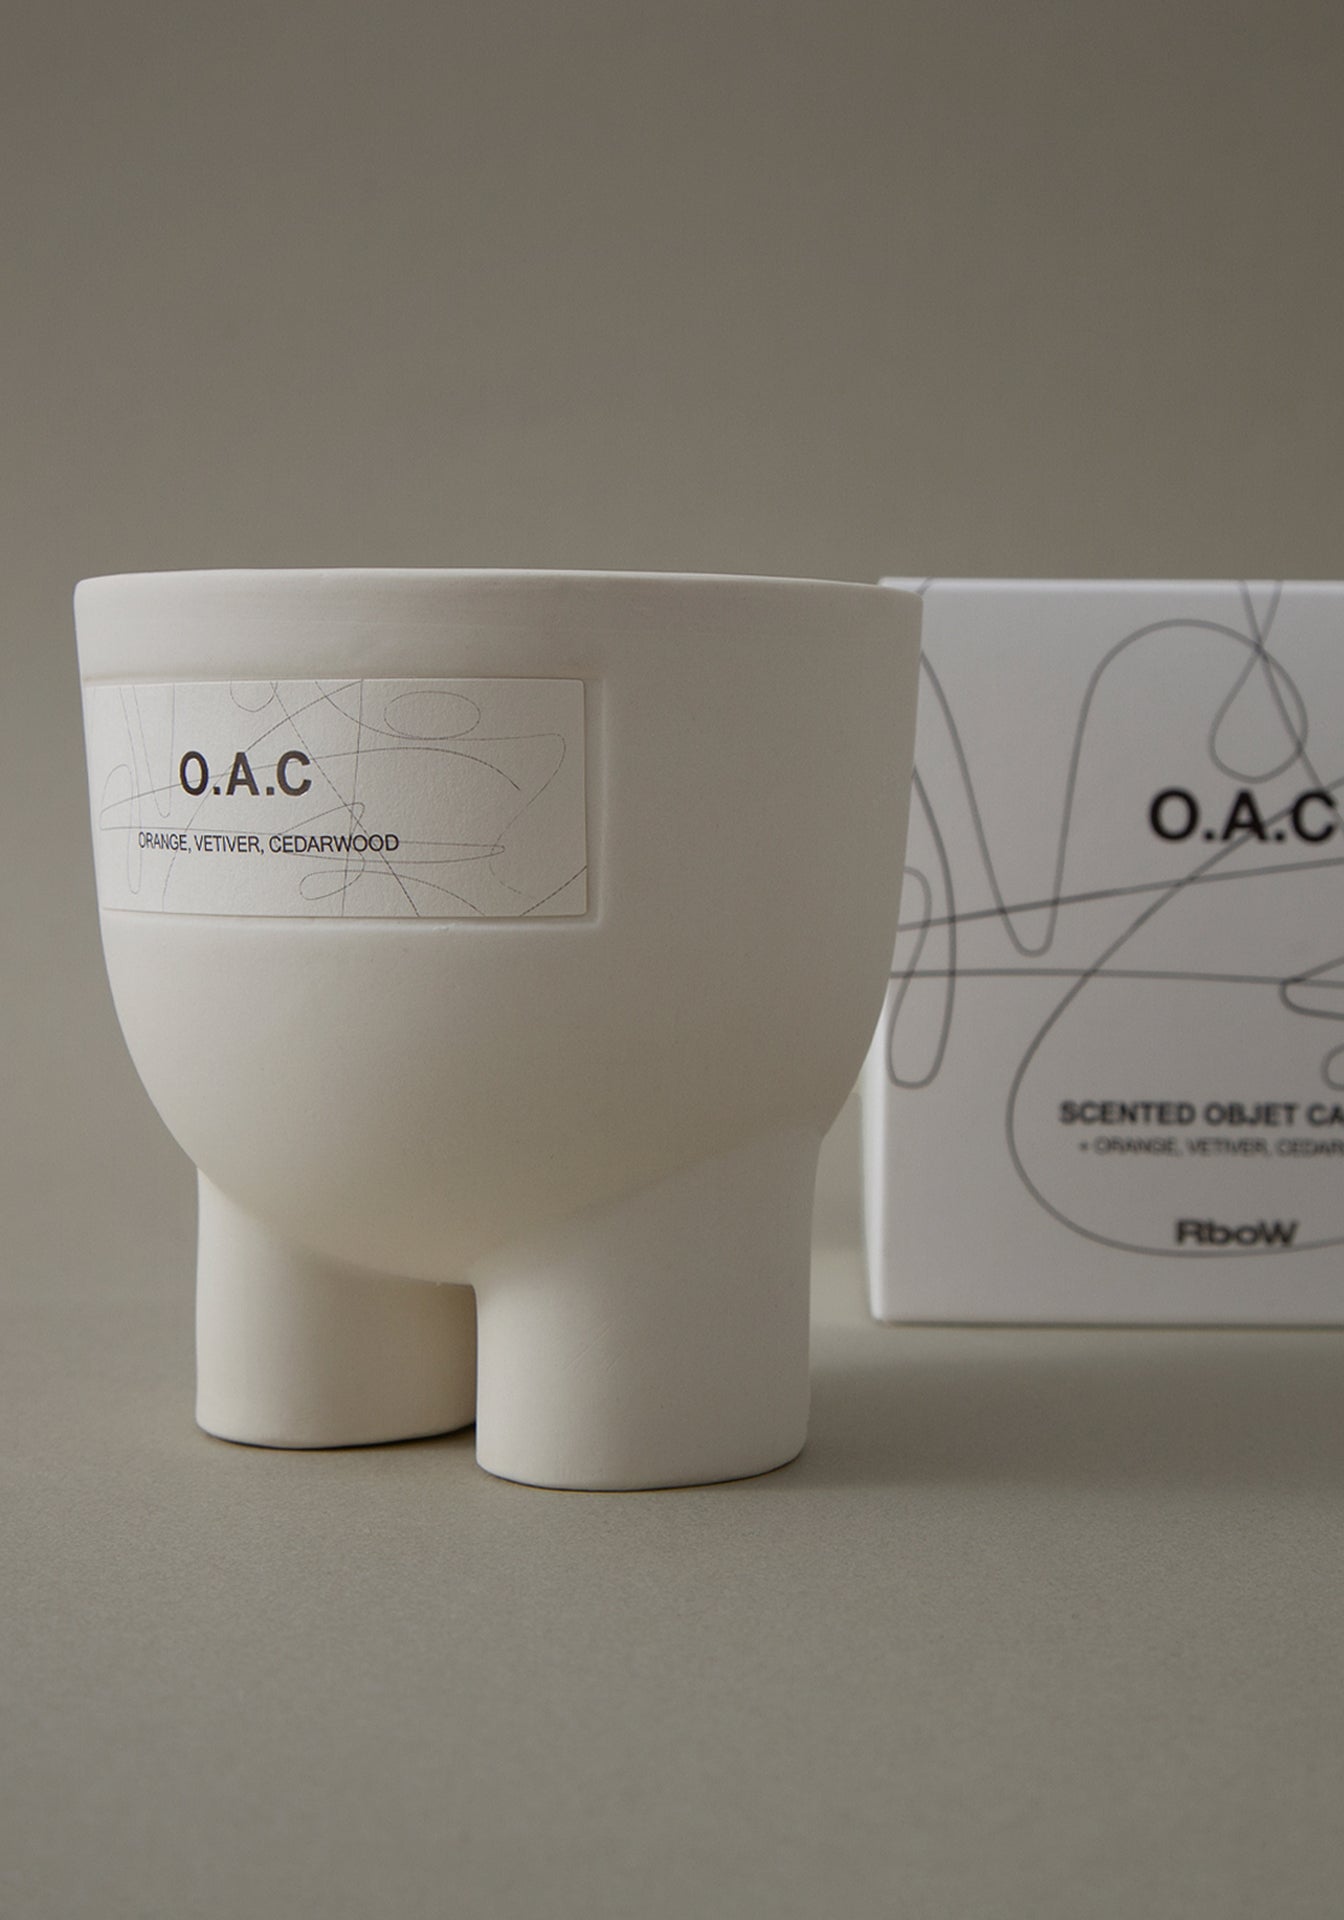 O.A.C Scented Objet Candal